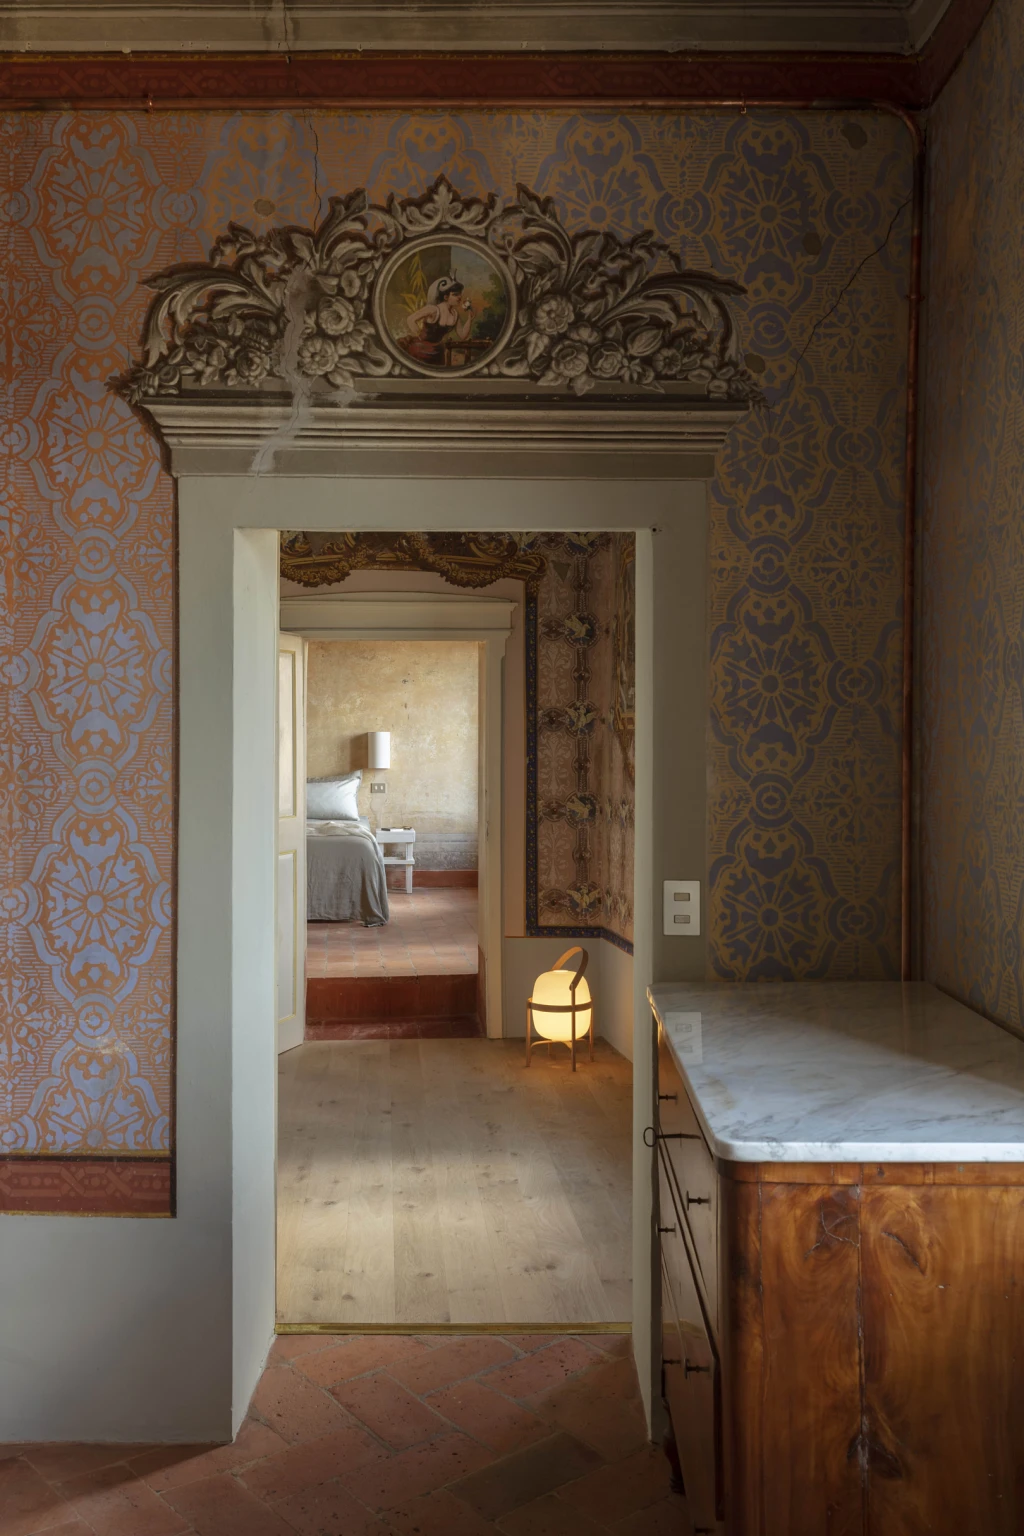 The house, with roots dating back to the 14th century, was restored with love and authenticity